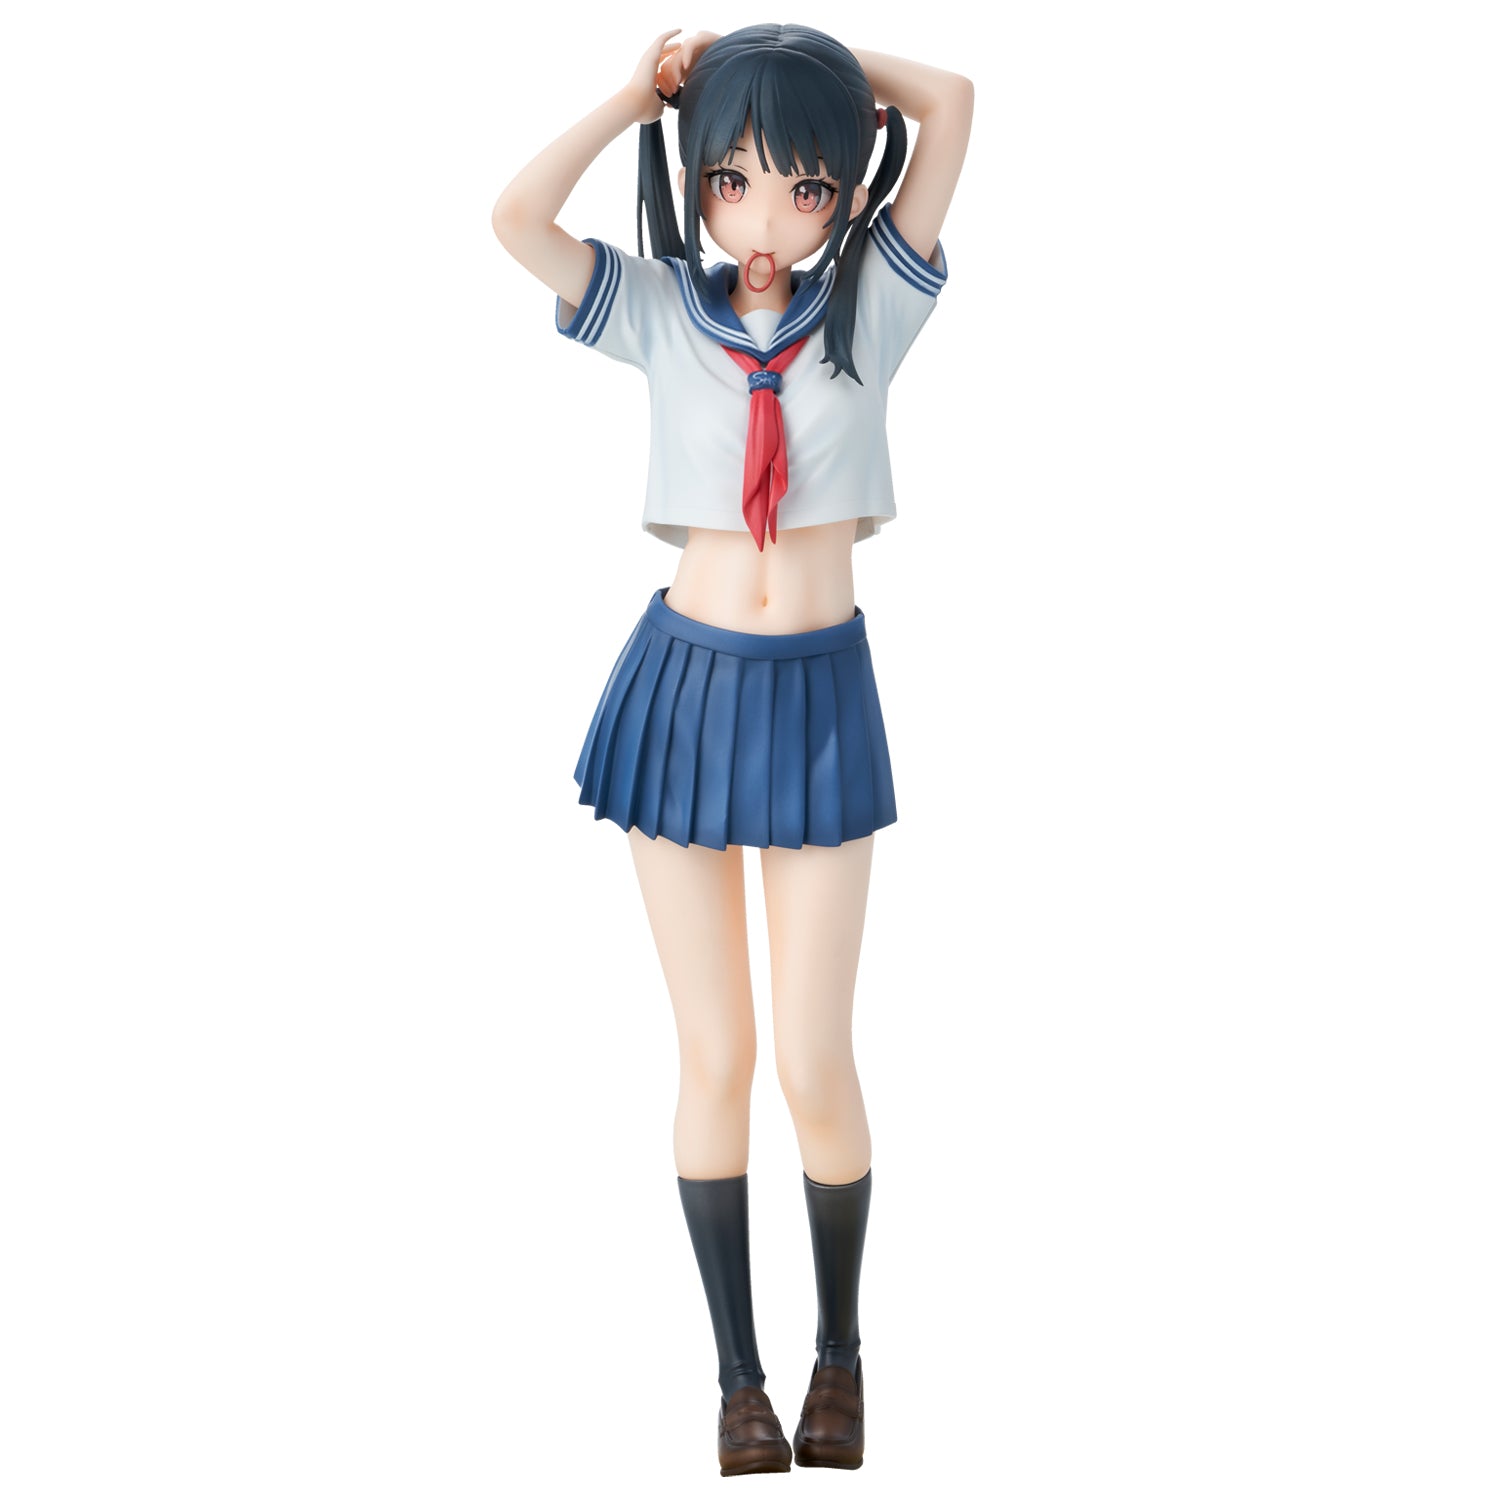 Estream Figures: Original Character By Kantoku - Sailor Fuku No Mannaka In The Middle Of The Sailor Suit